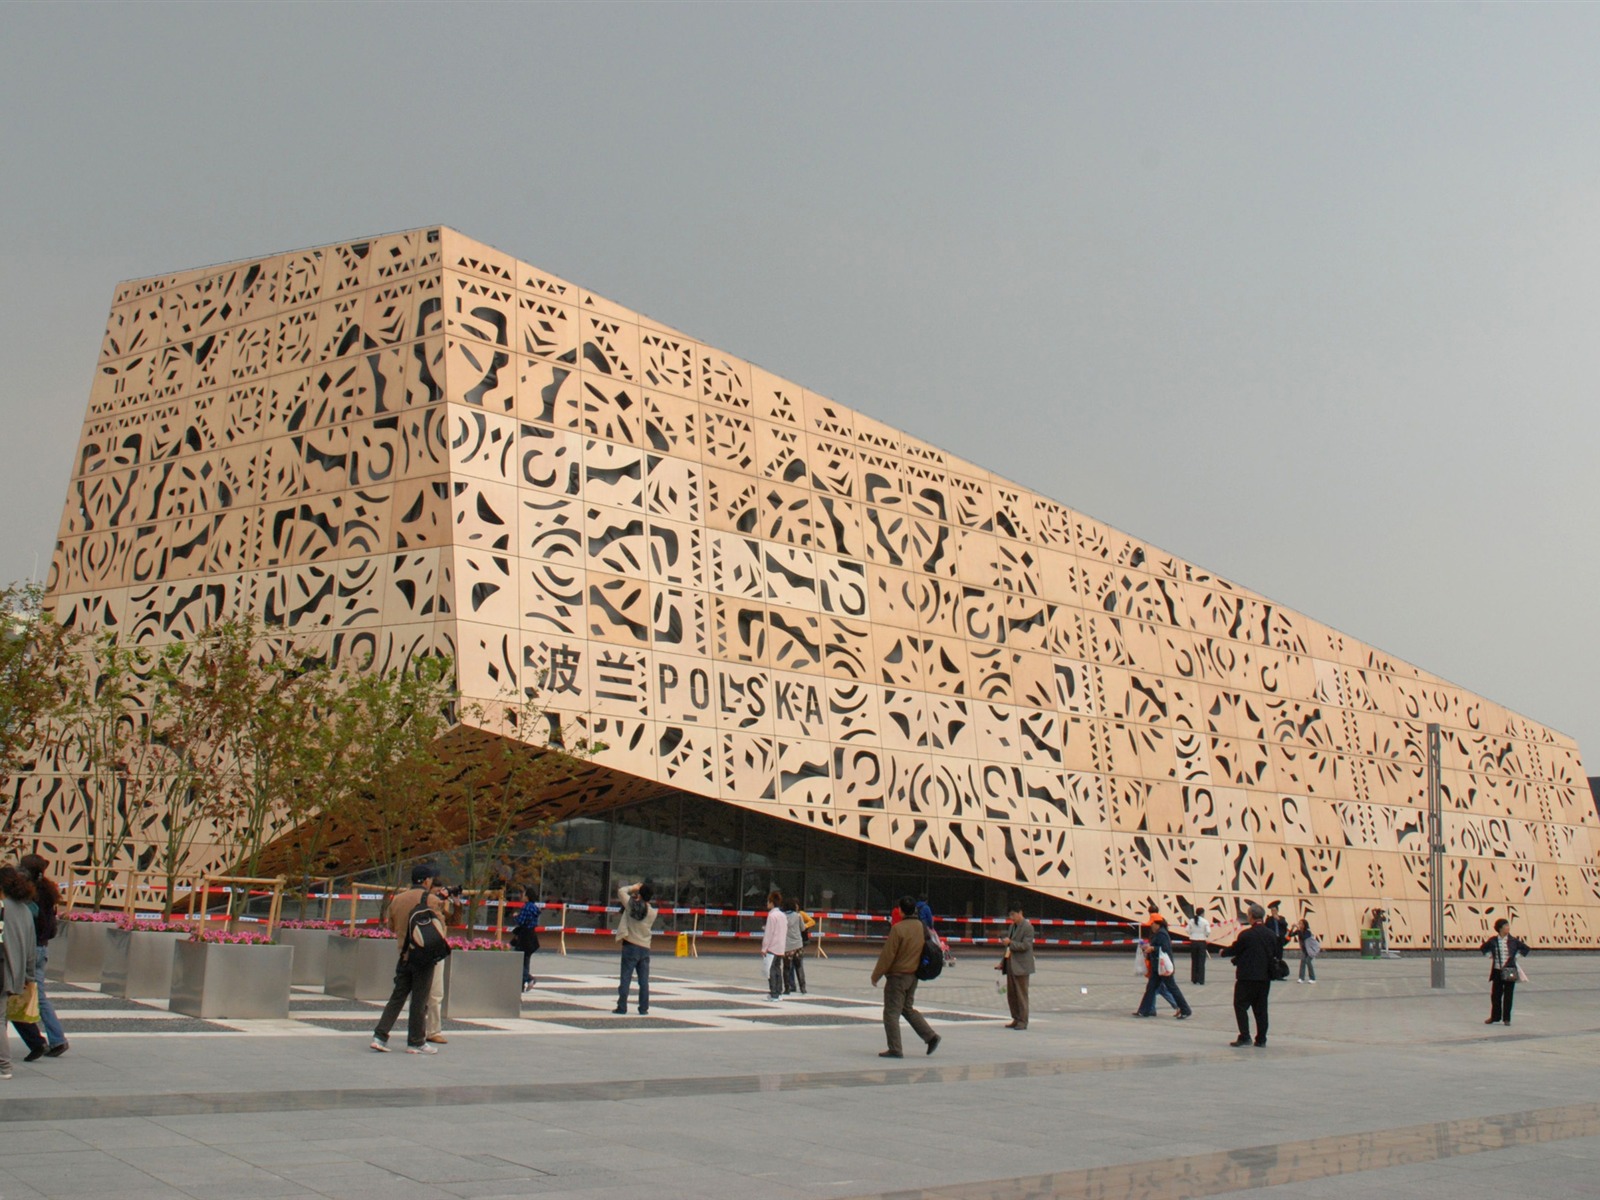 Commissioning of the 2010 Shanghai World Expo (studious works) #25 - 1600x1200